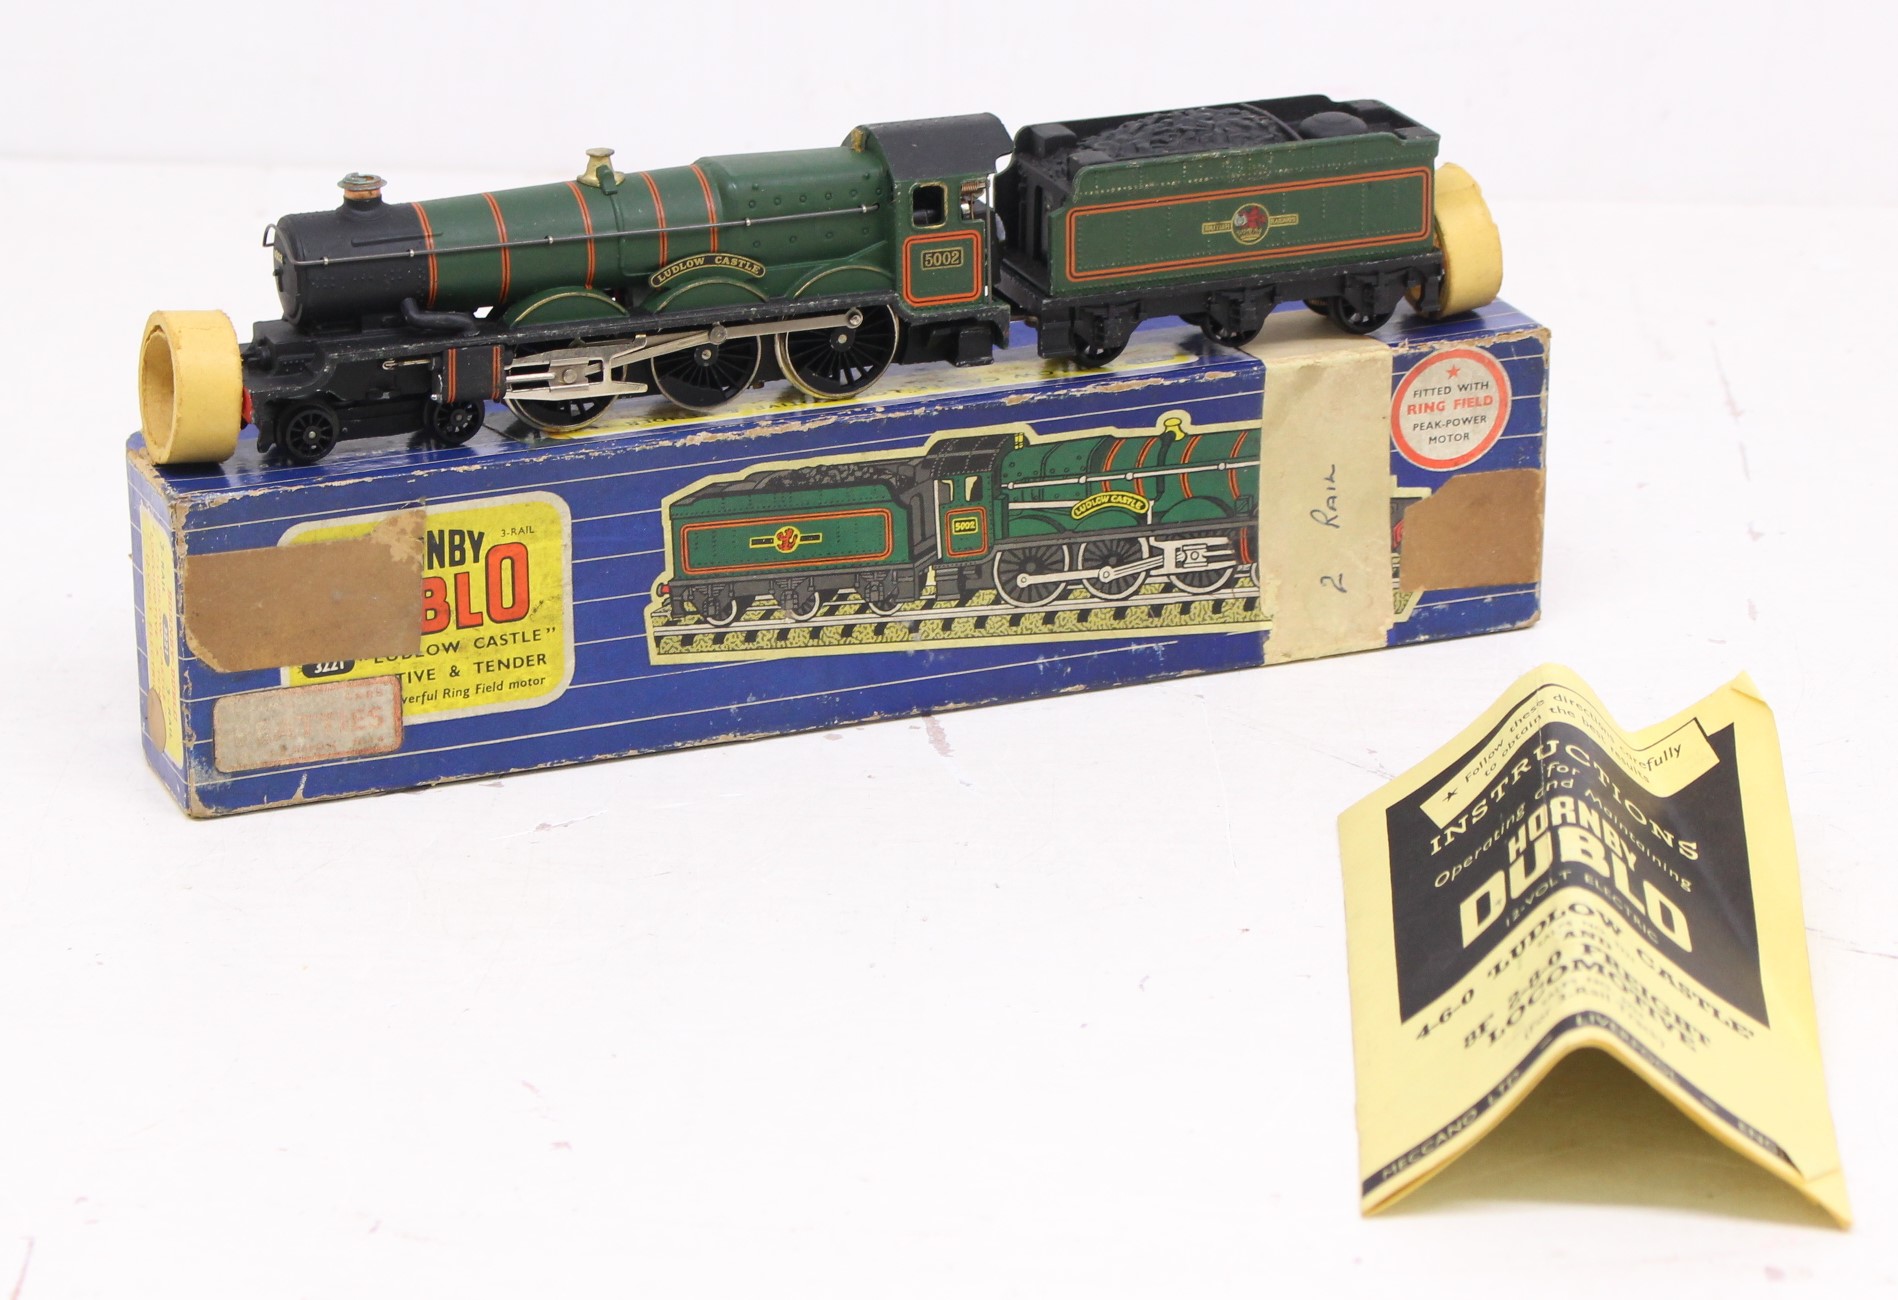 Hornby: A boxed Hornby Dublo, 2-Rail, Ludlow Castle Locomotive and Tender, Reference 3221.